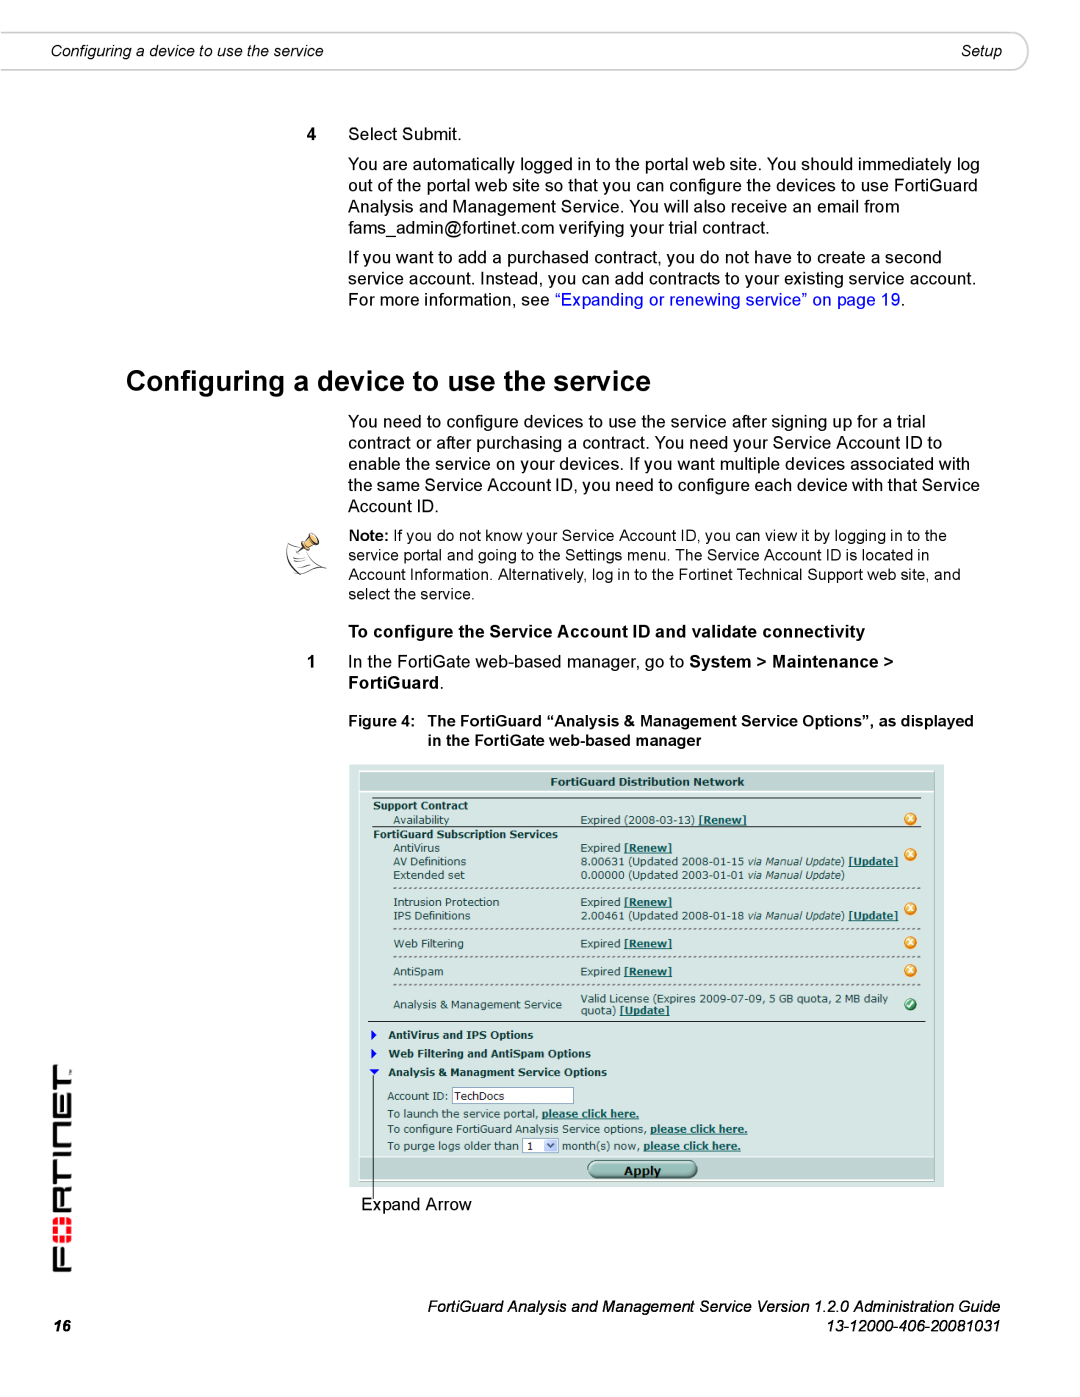 Fortinet 1.2.0 Configuring a device to use the service, To configure the Service Account ID and validate connectivity 